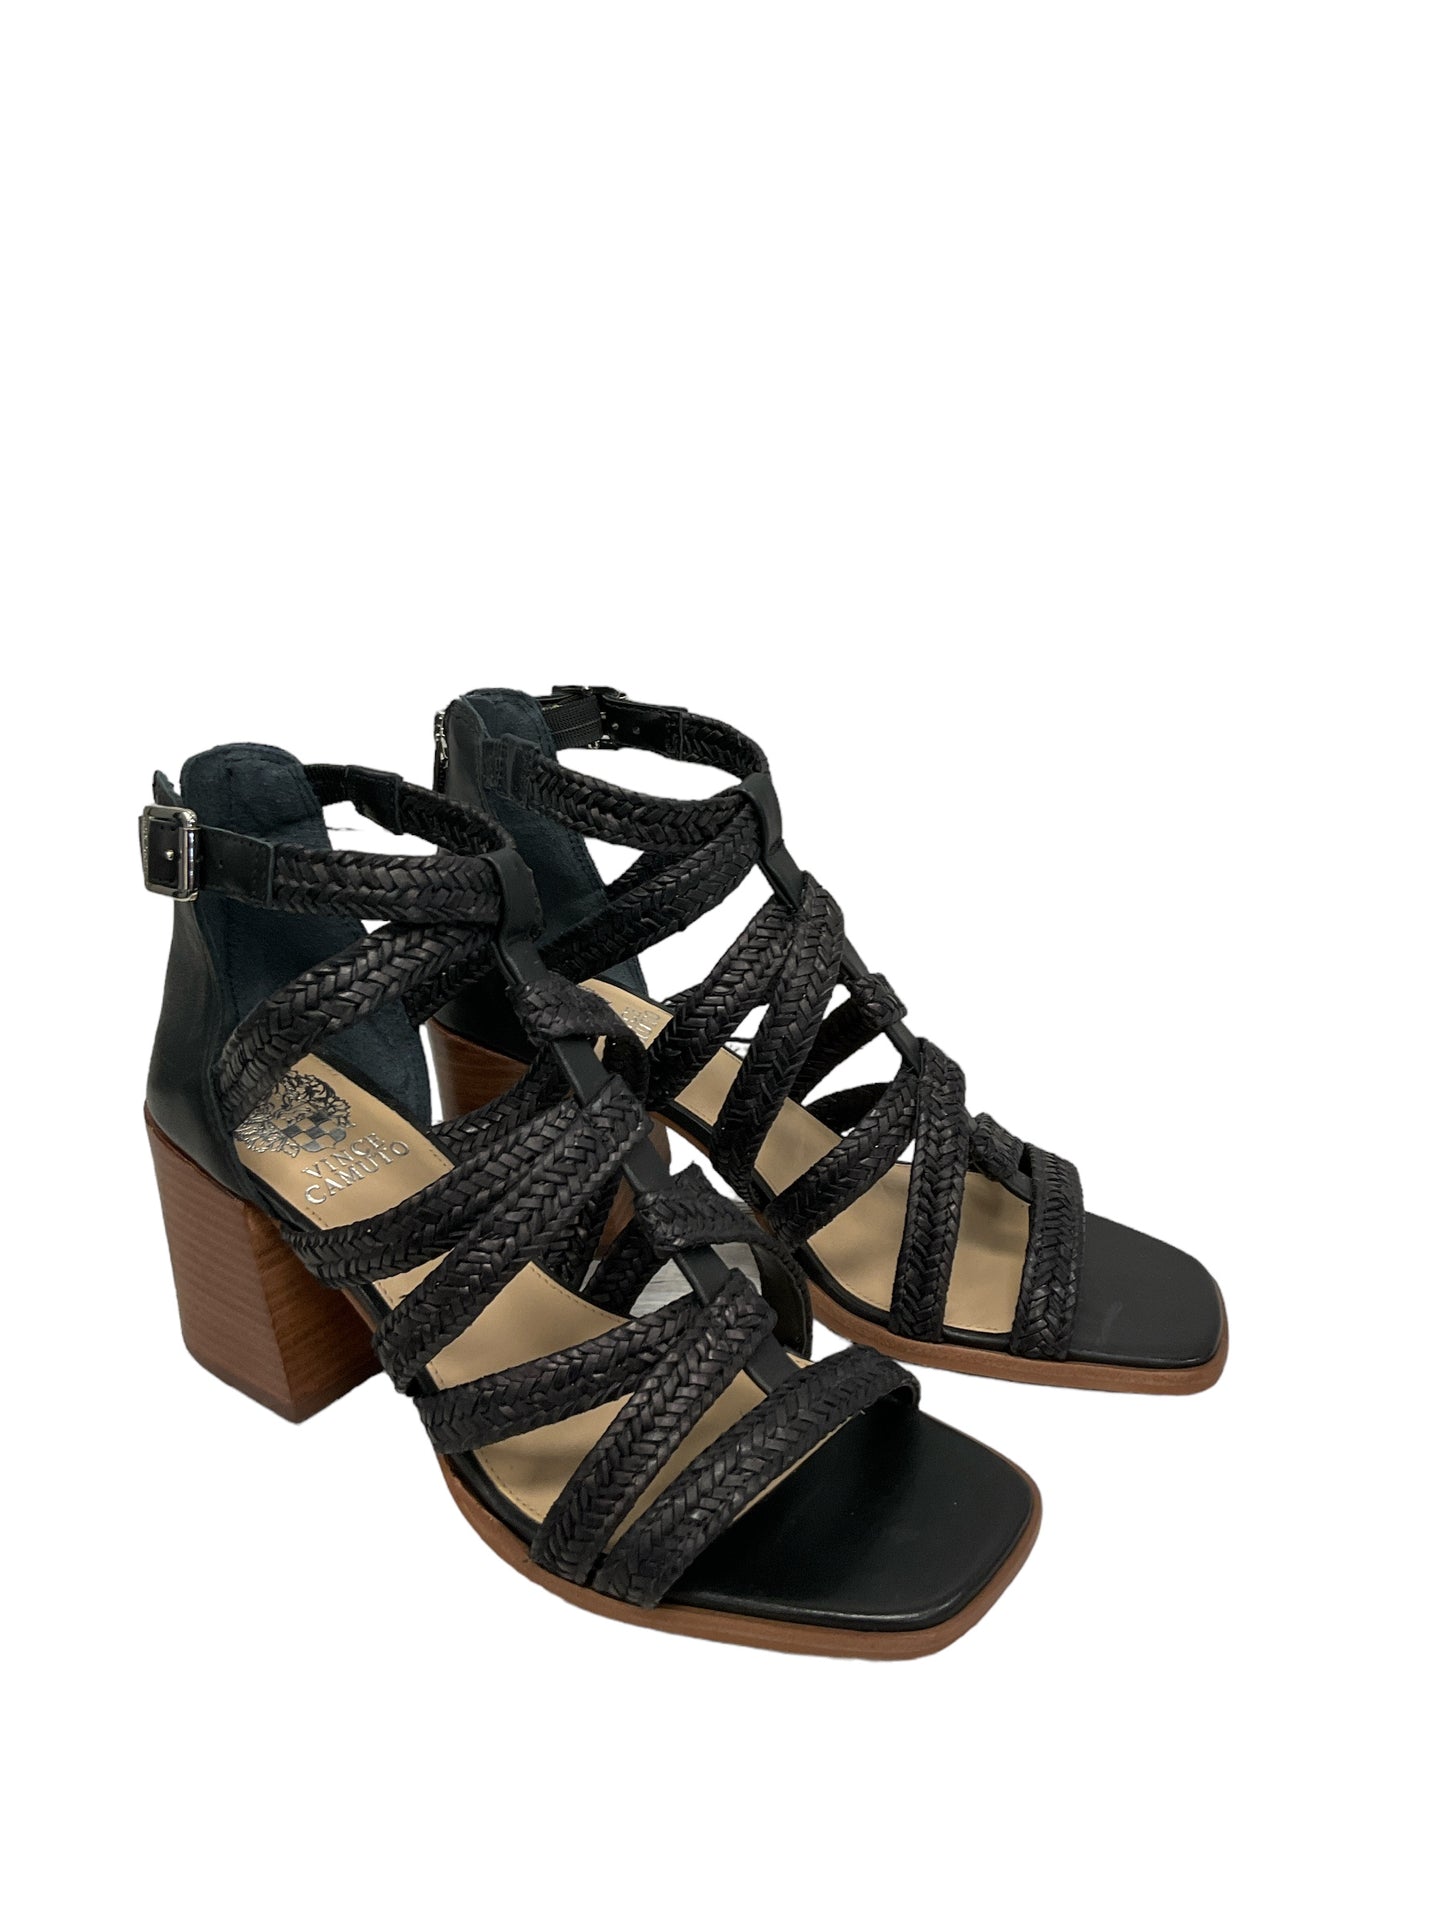 Sandals Heels Block By Vince Camuto  Size: 8